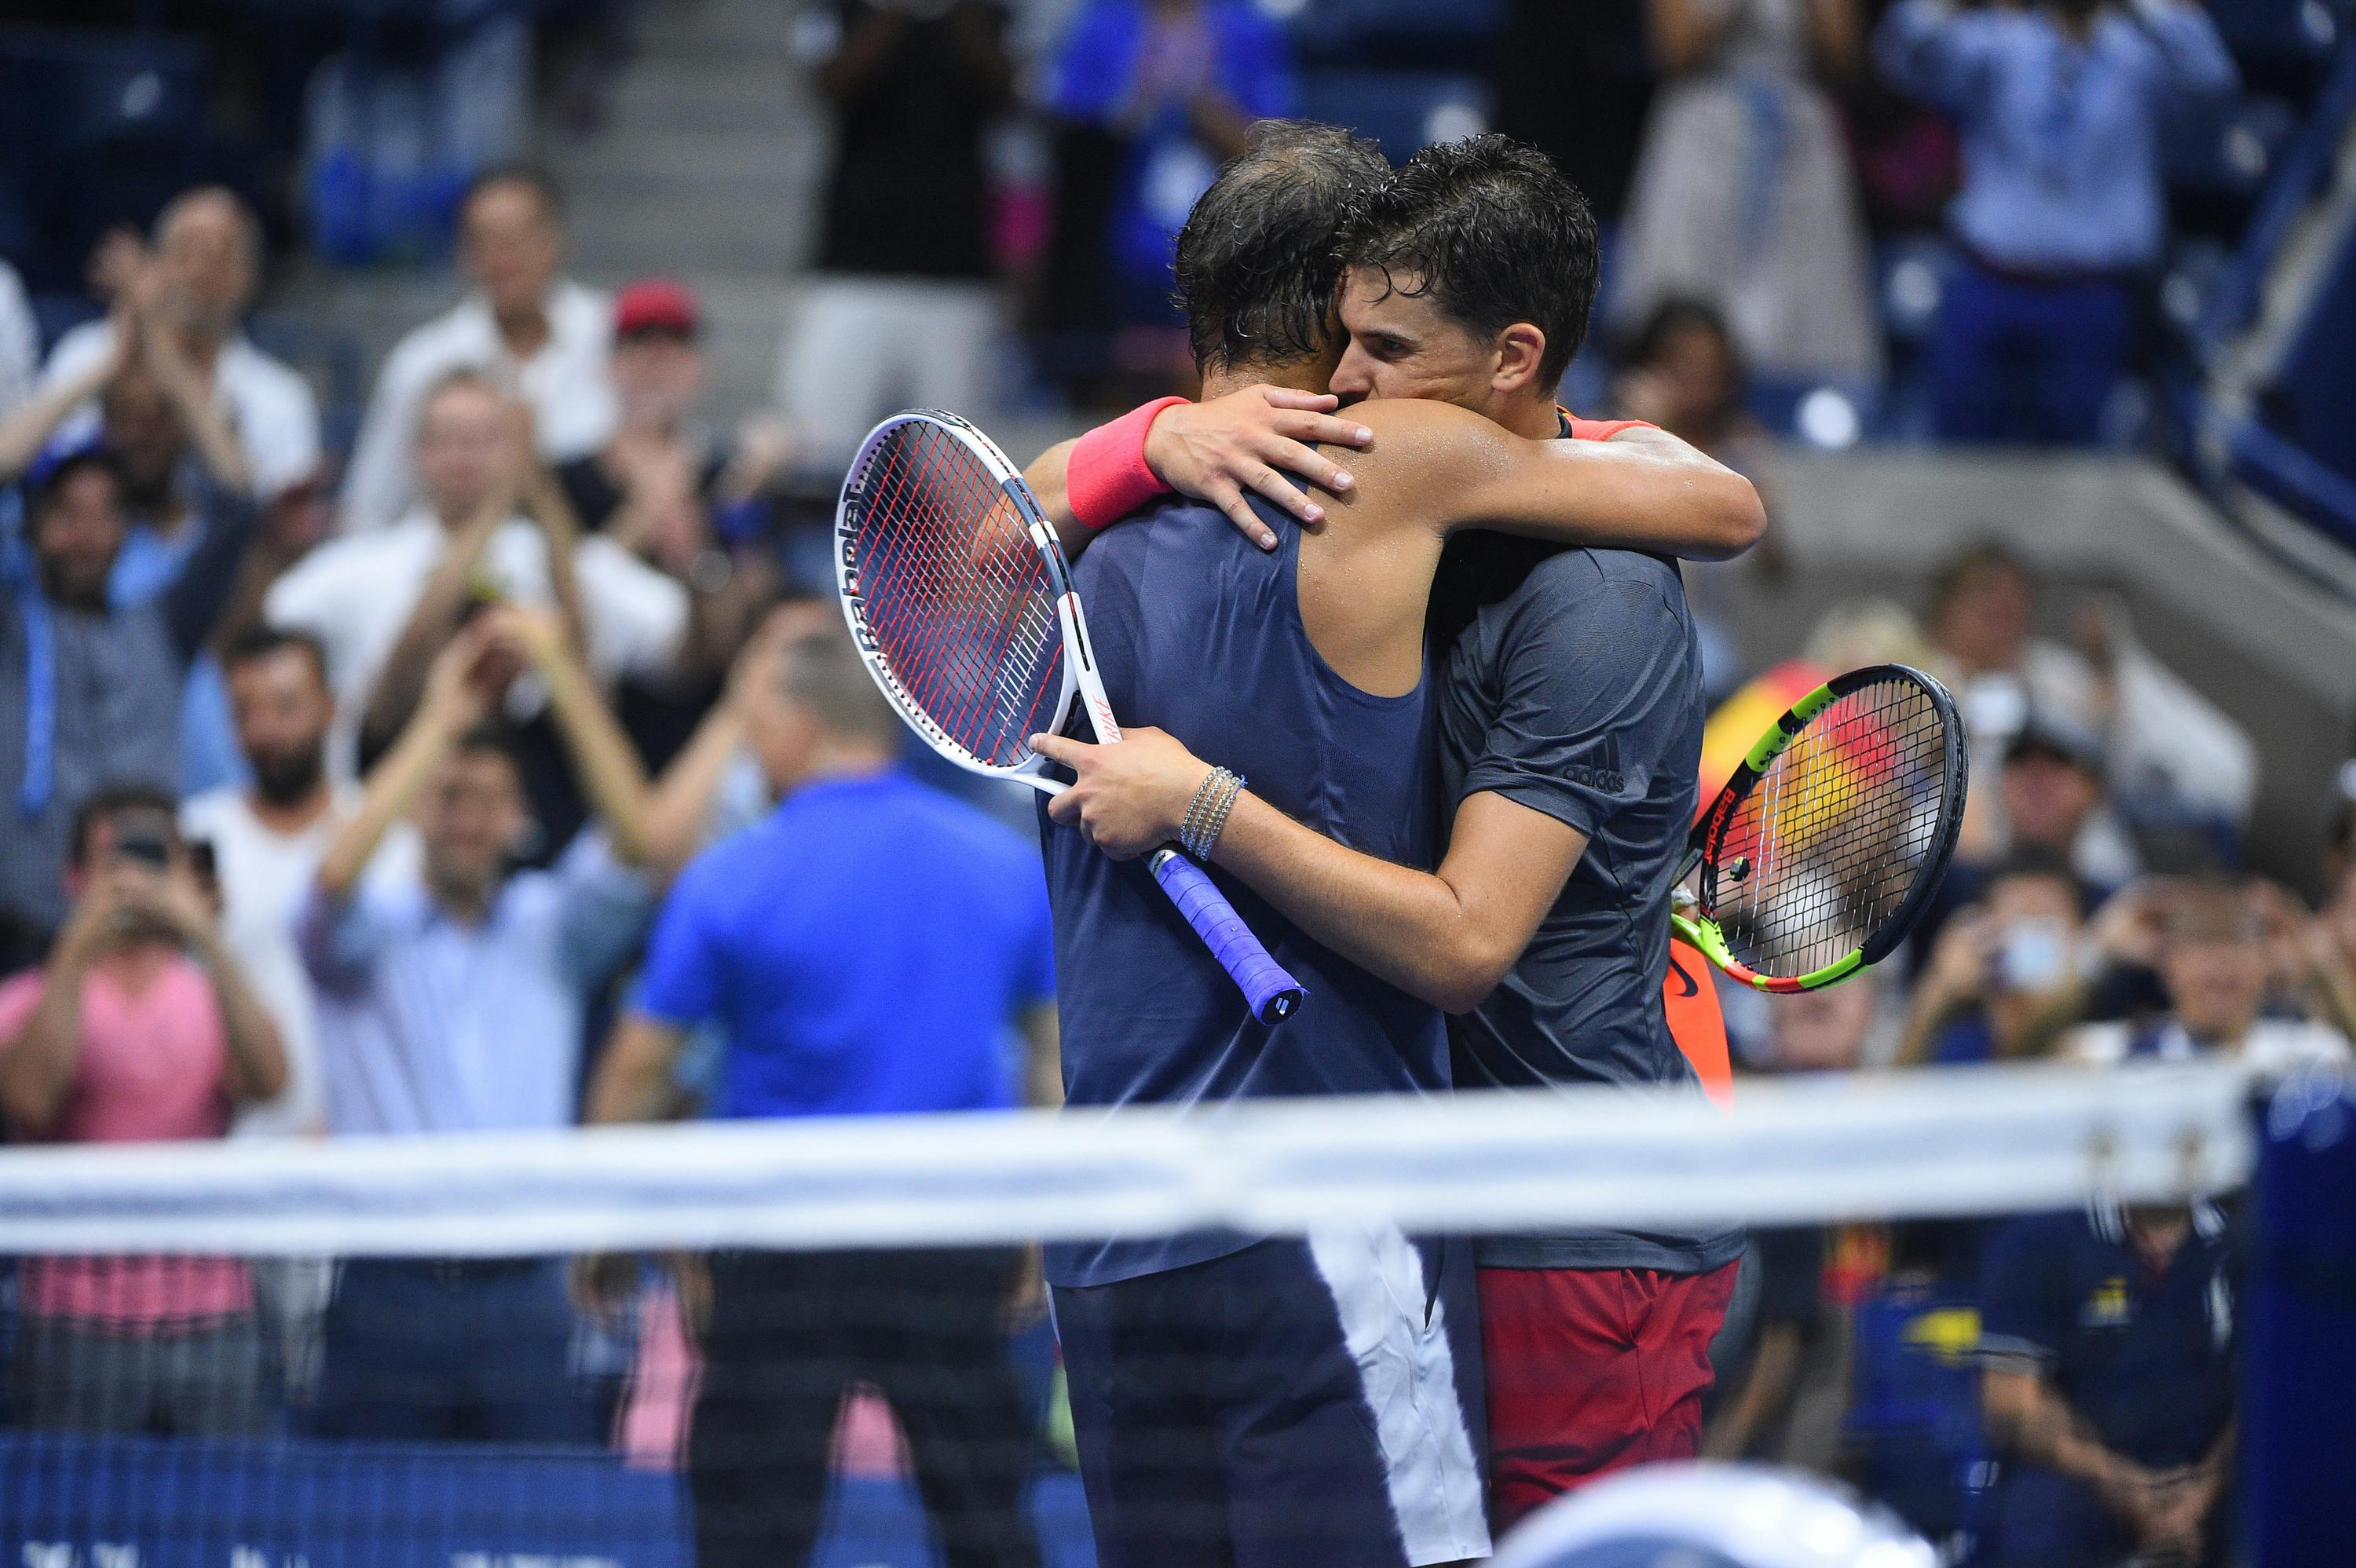 Rafael Nadal and Dominic Thiem hugging at the 2018 US Open